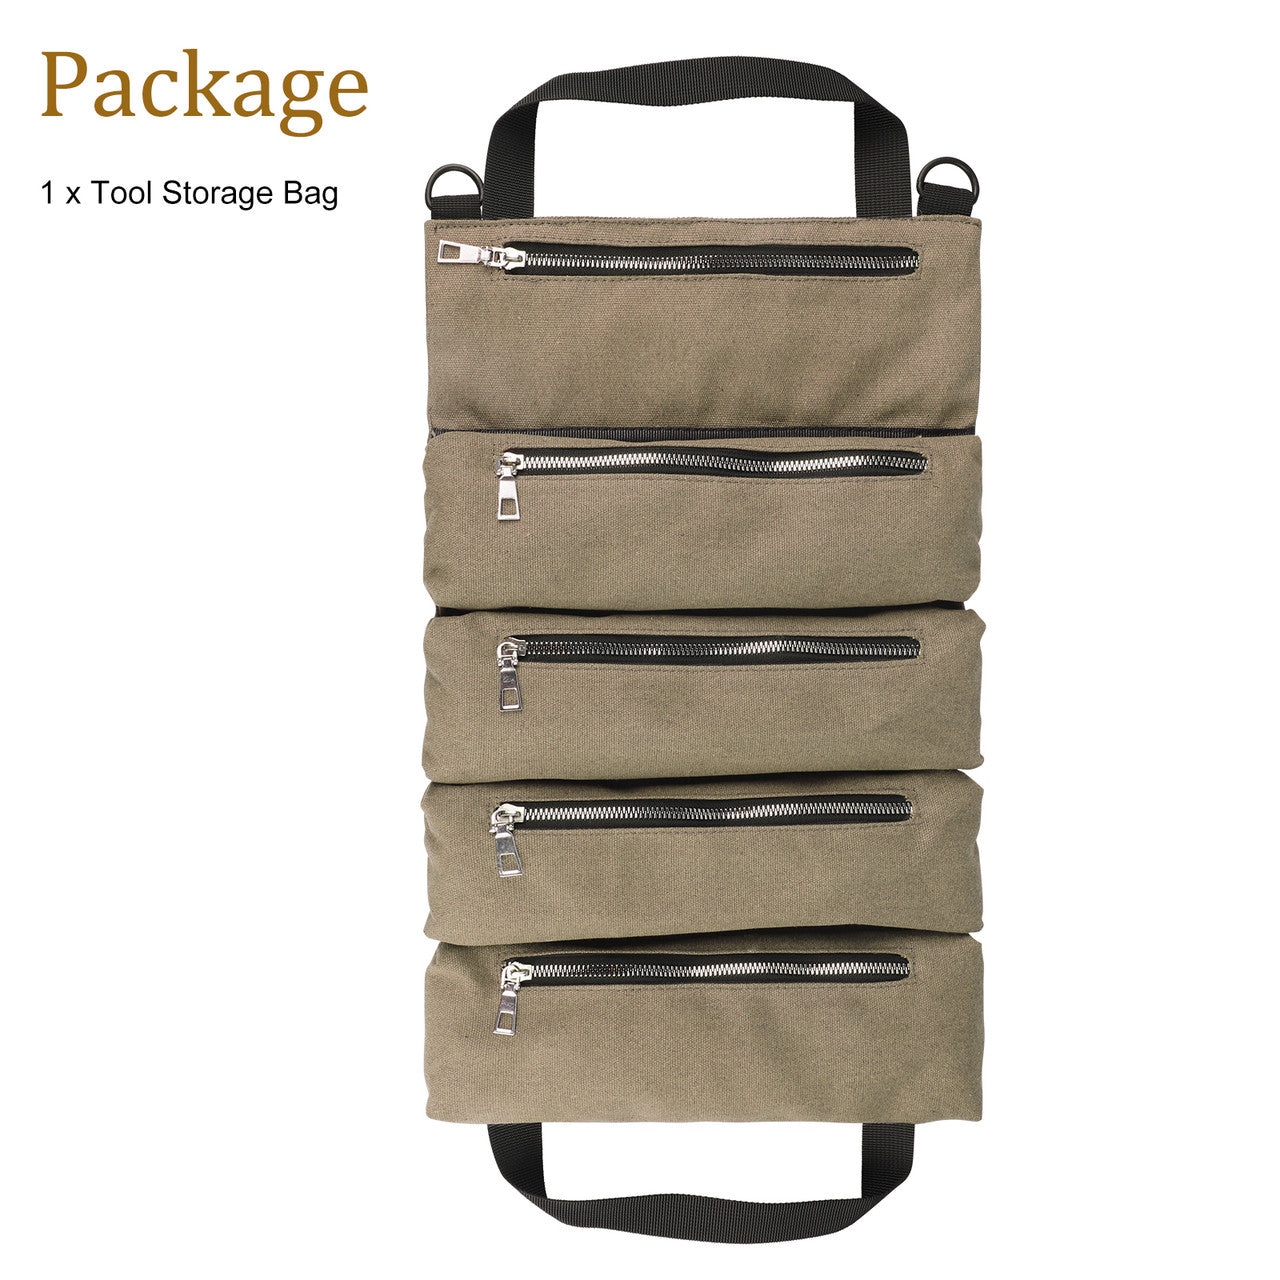 Roll Up Tool Bag - #12 Cotton canvas Heavy Duty Multi-Purpose Toll Organizer Bag for Motocycle, Truck, Car, UTV, Compact Roll Up Tool Bag for Mechanic & Electrician, 5 Zippered Tool Pockets (Khaki)